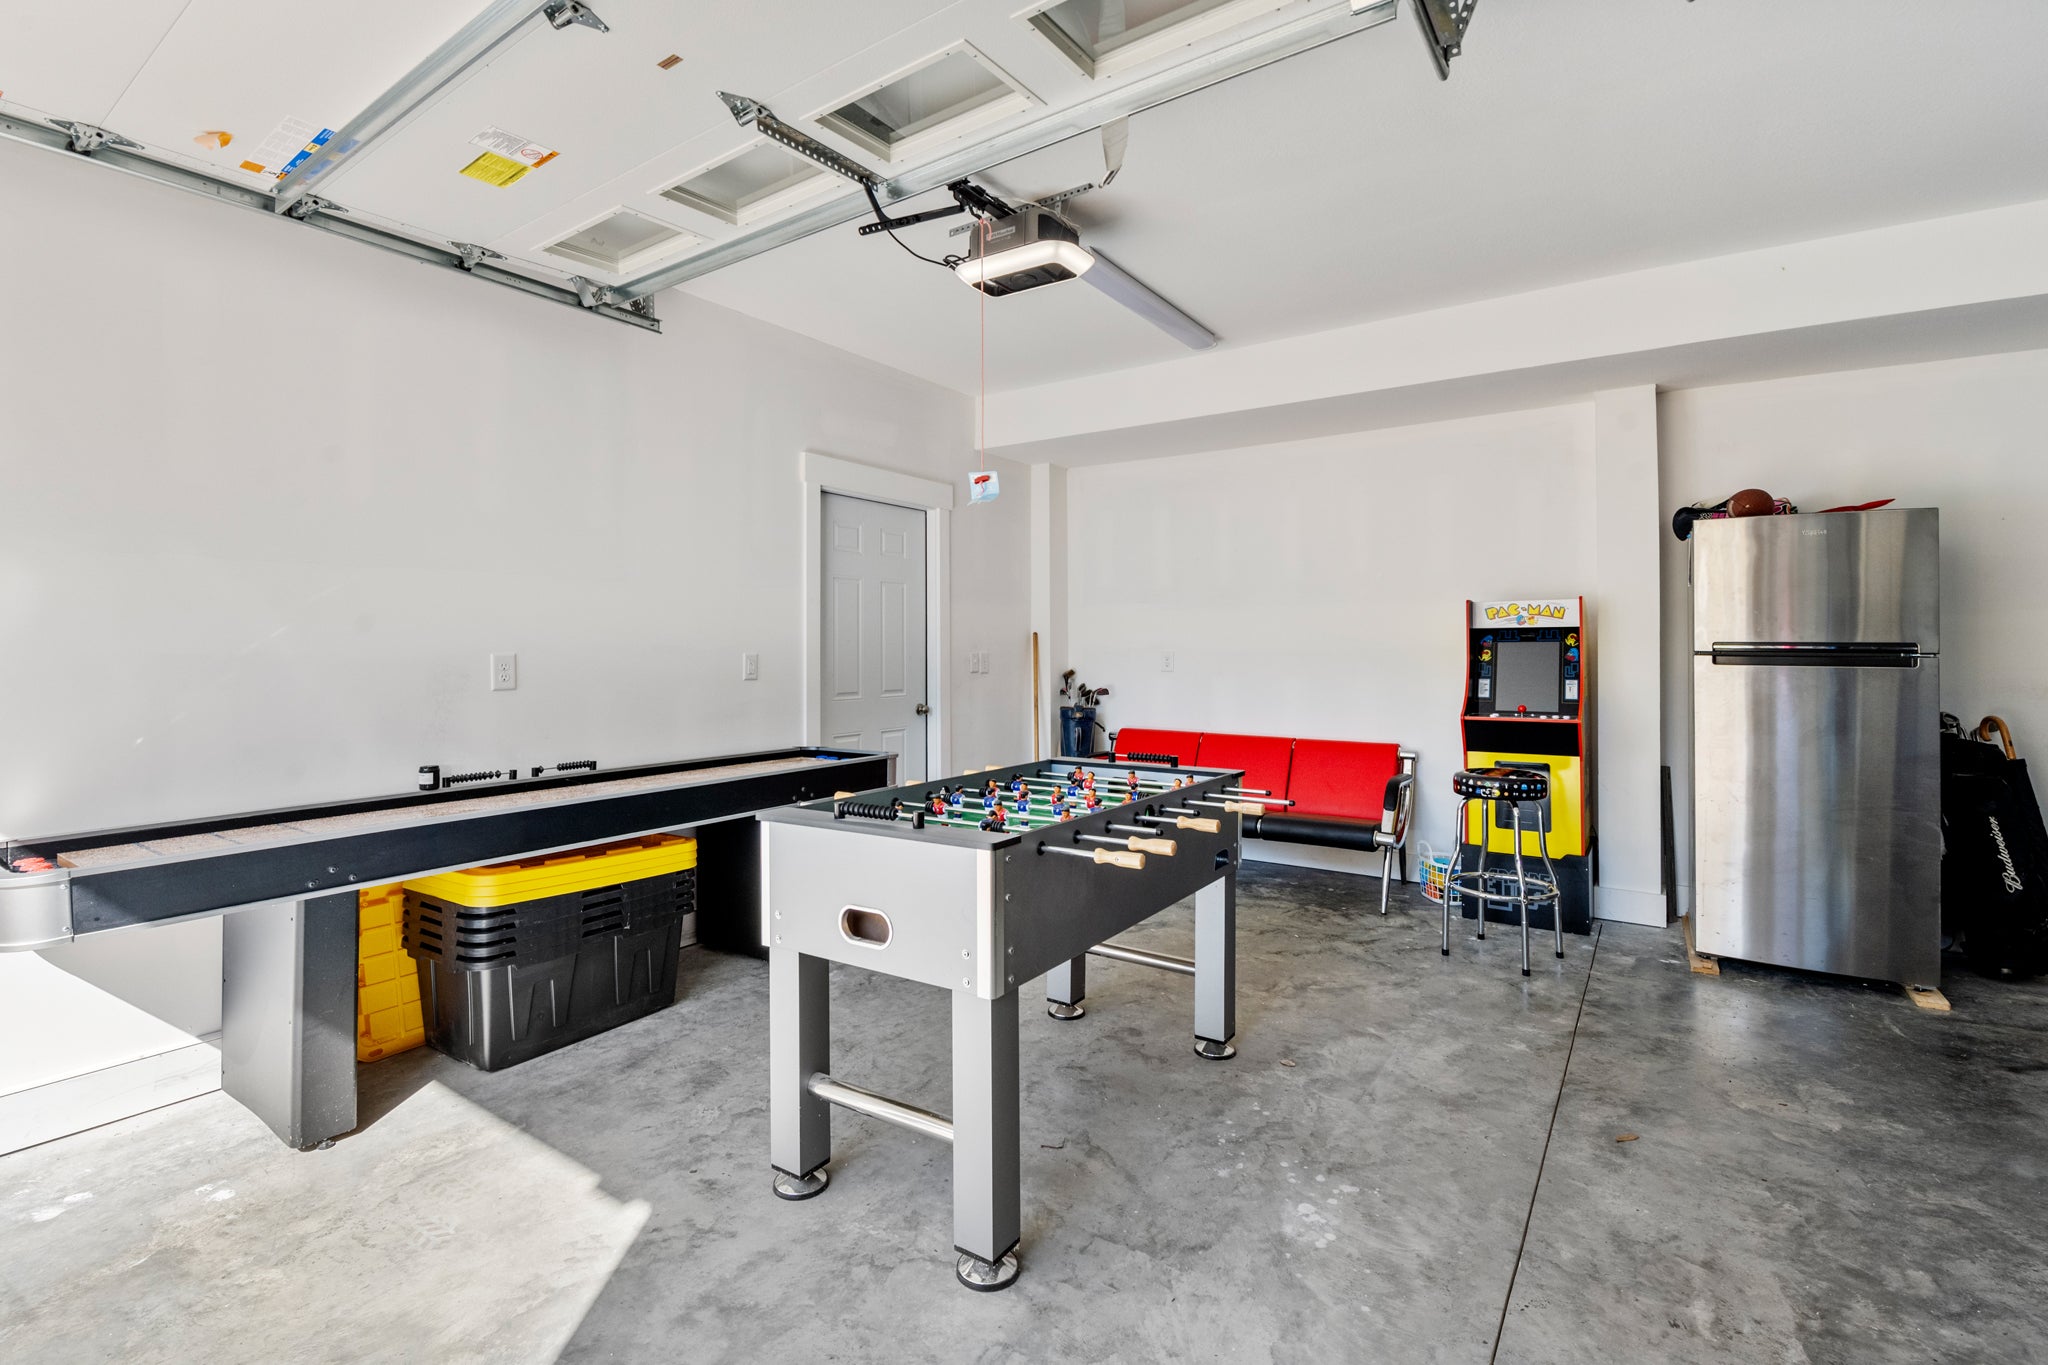 CC138: All Inn and Then Some | Bottom Level Garage/Game Room